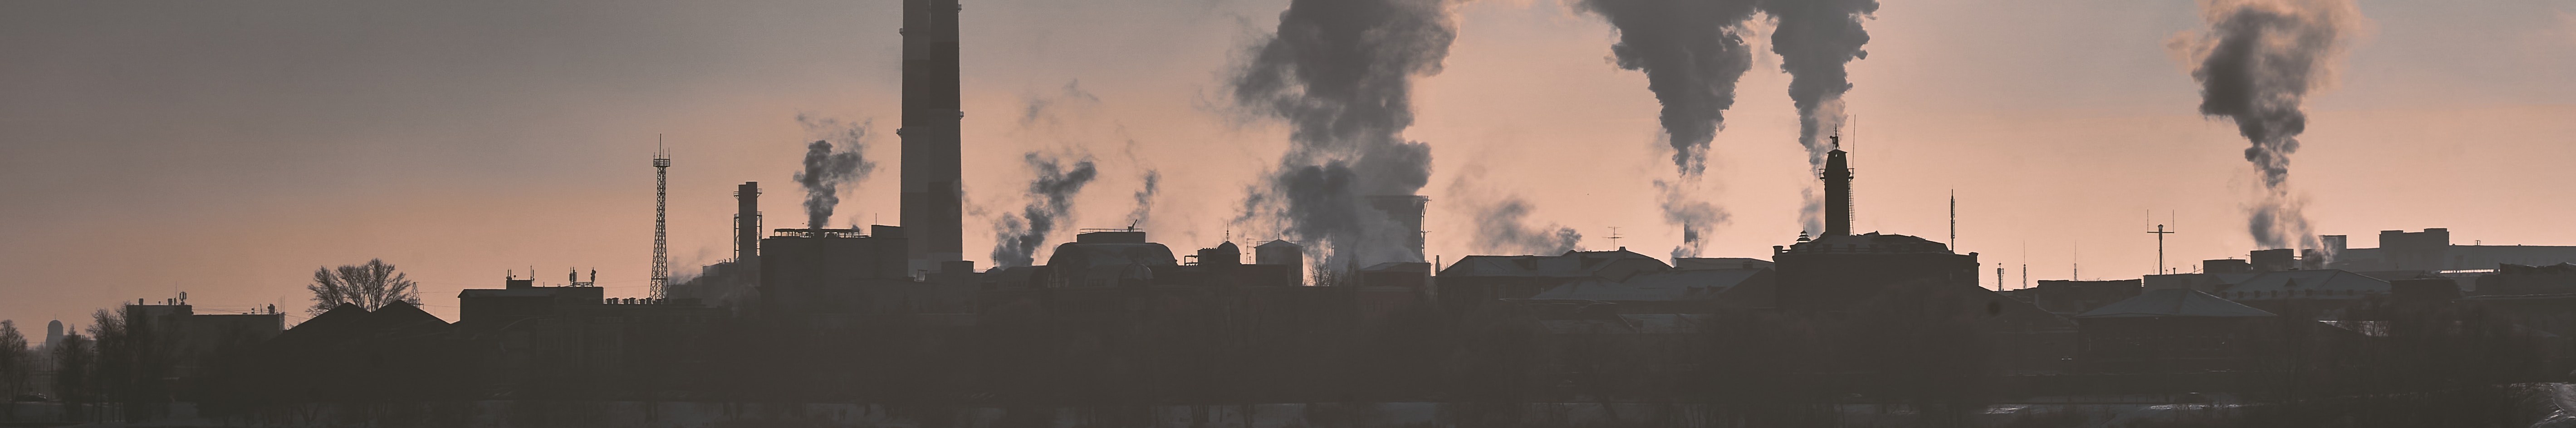 Boral emits air pollutants that have detrimental impacts on the human health